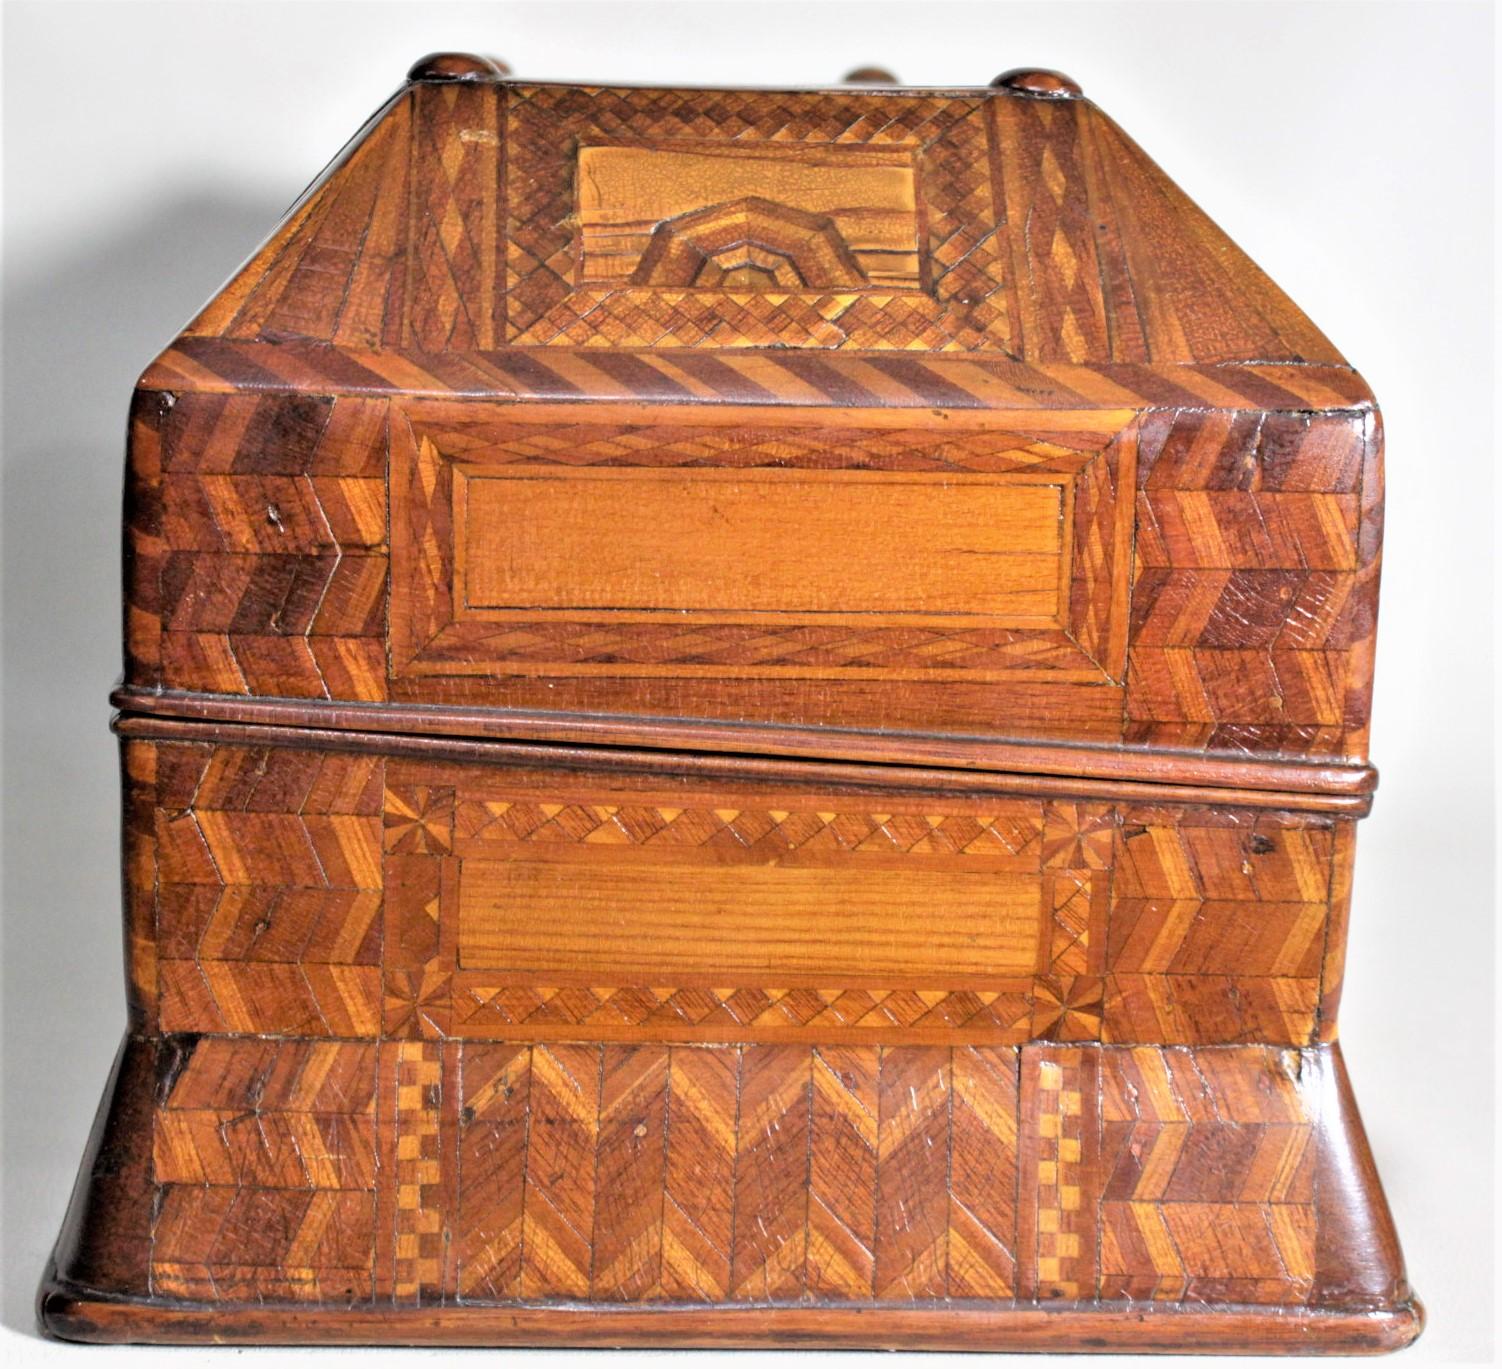 Softwood Superb Antique Folk Art Parquetry Casket Styled Writing Box or Lap Desk For Sale